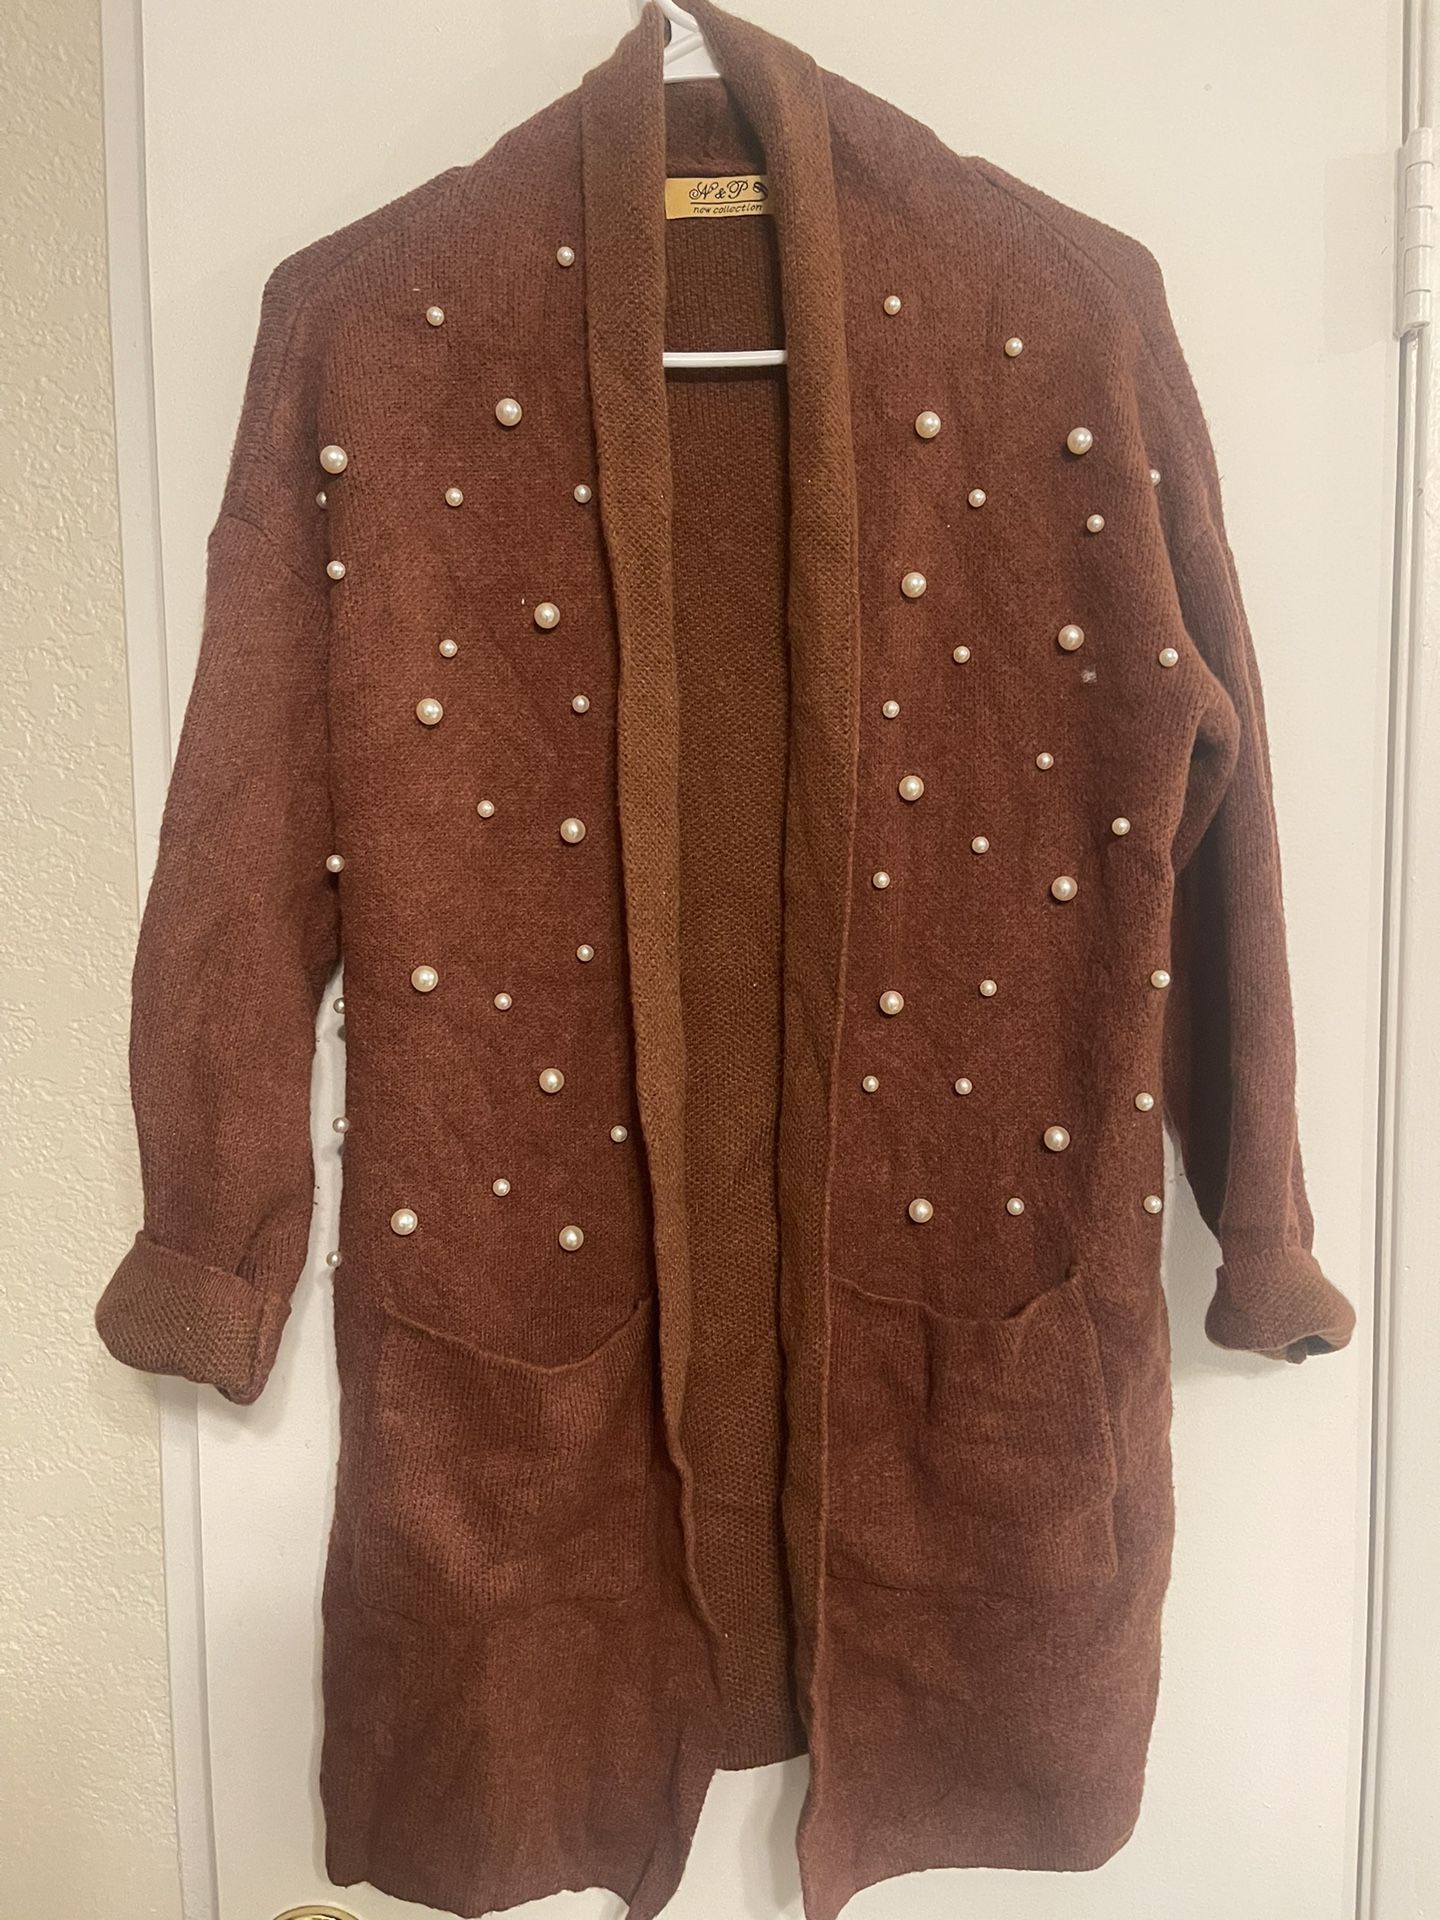 brown cardigan sweater with pearls size M/L  